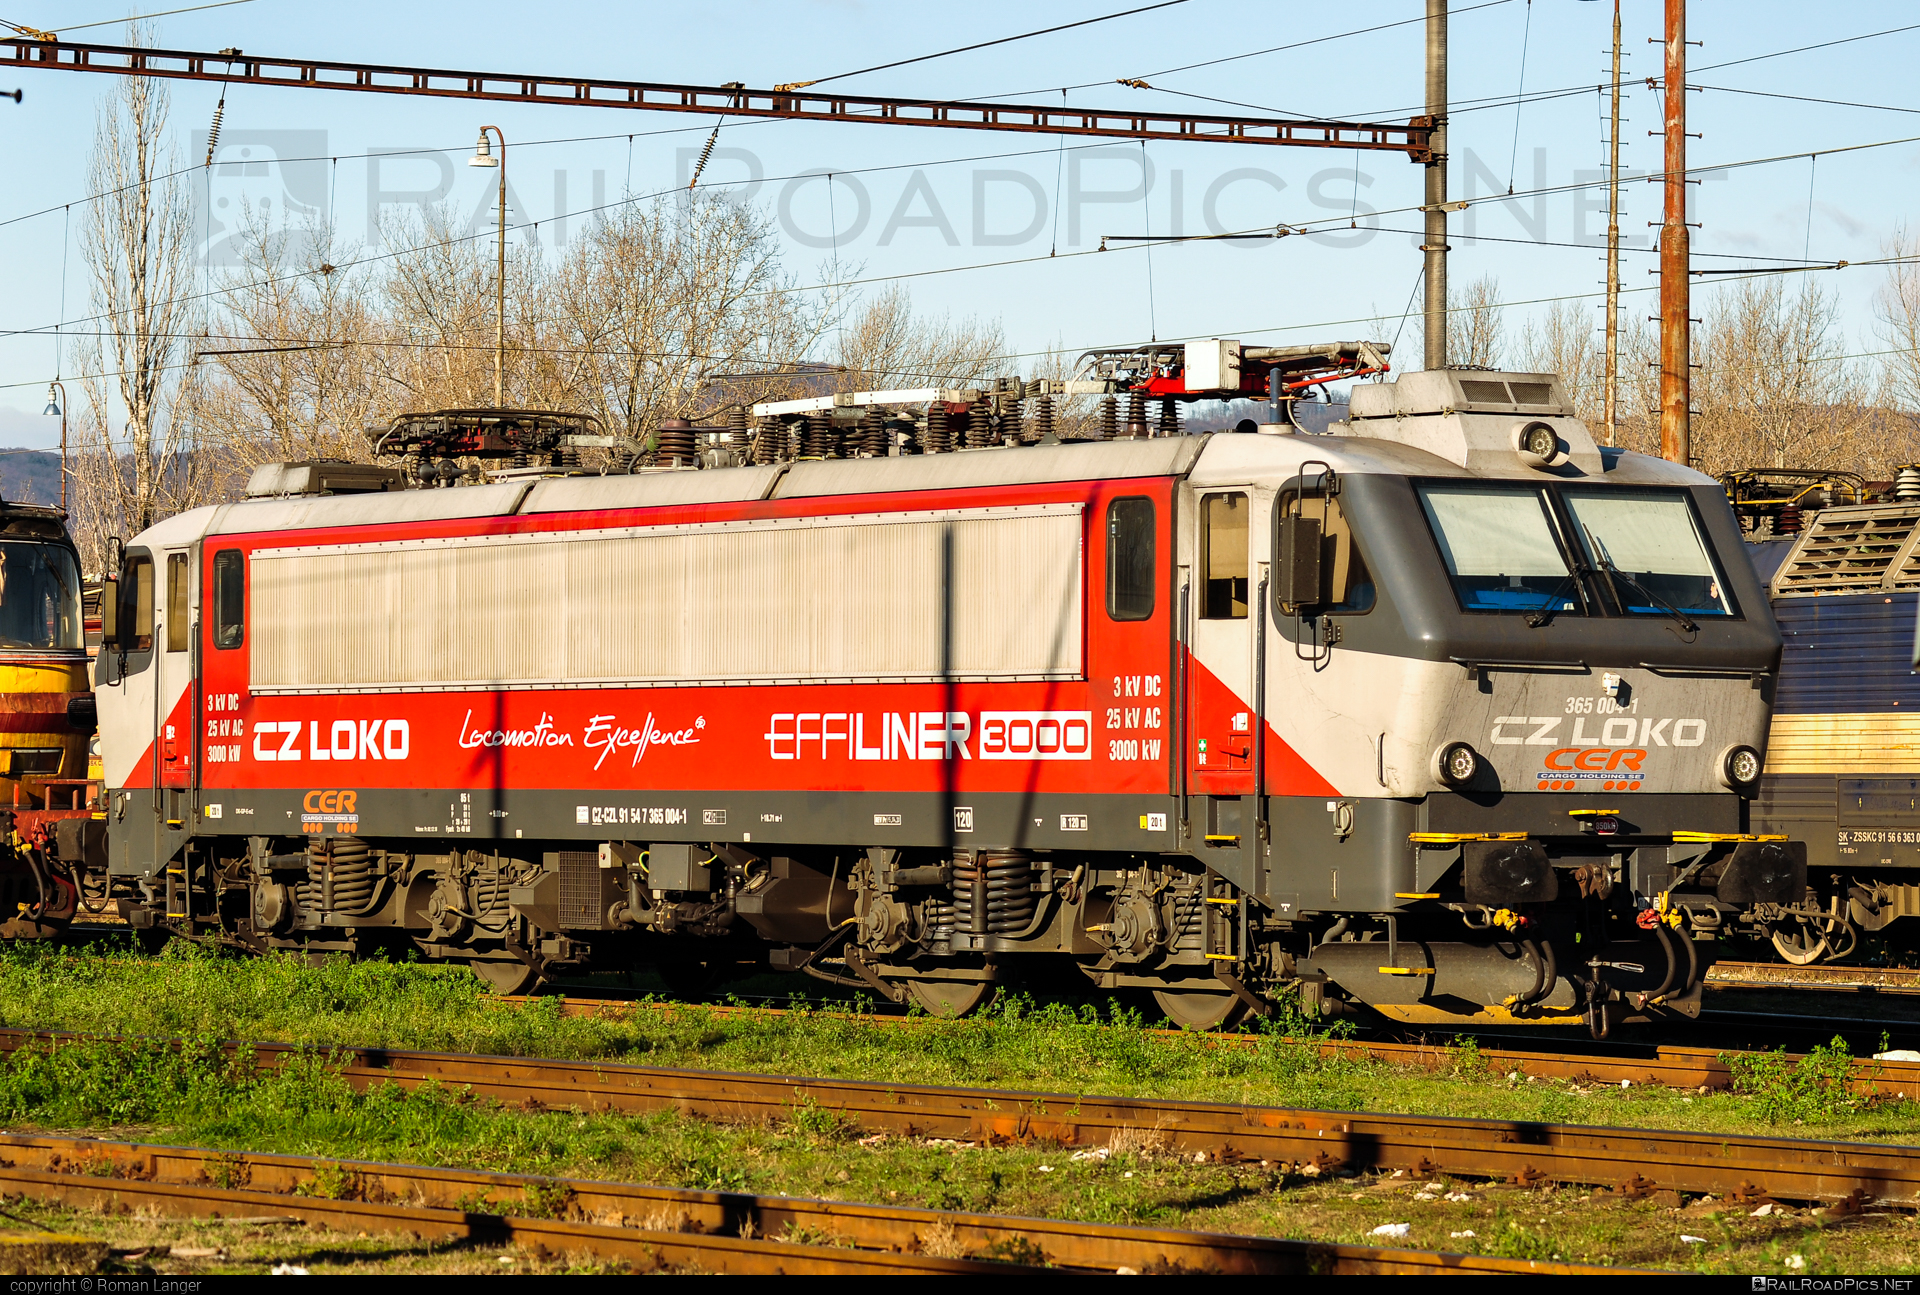 CZ LOKO EffiLiner 3000 - 365 004-1 operated by CER Slovakia a.s. #belgicanka #cer #cersk #cerslovakia #cerslovakiaas #czloko #czlokoas #effiliner #effiliner3000 #sncb12 #sncbclass12